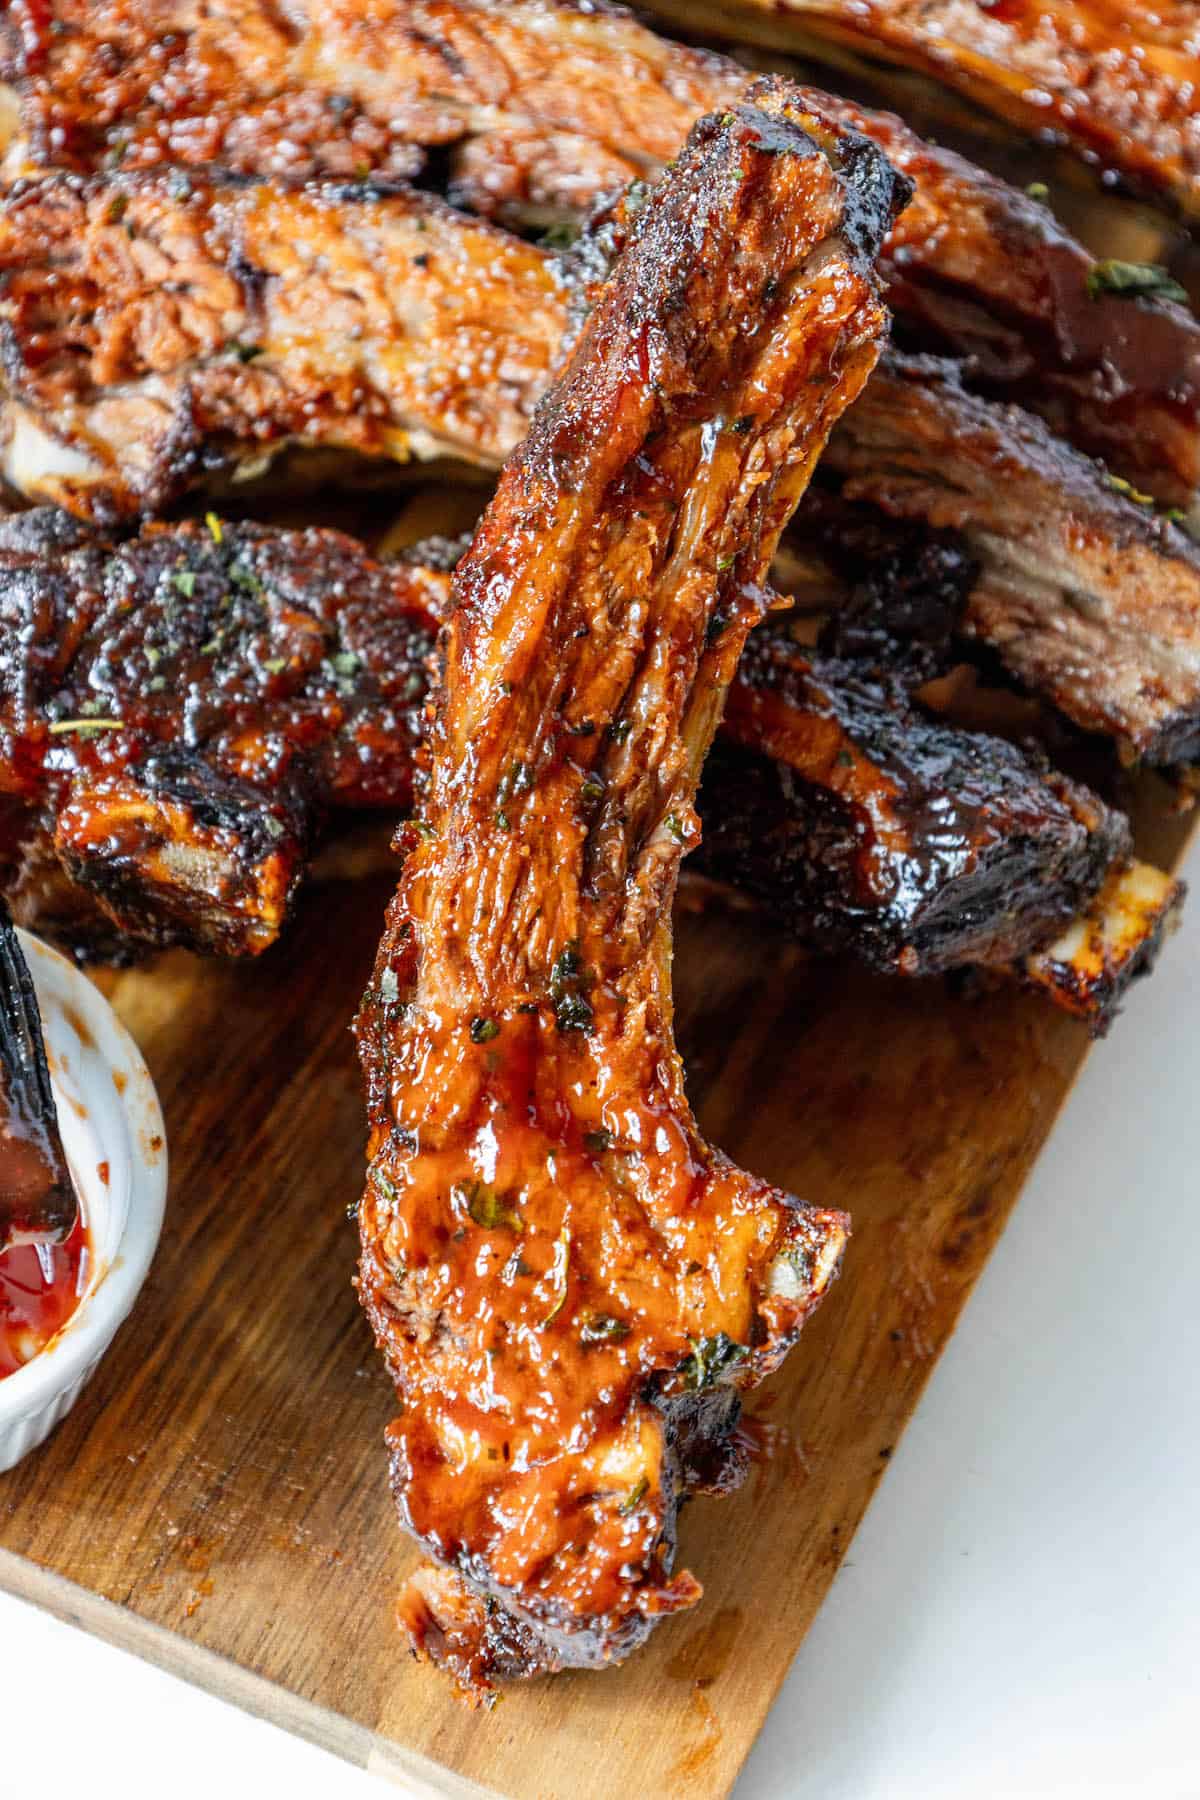 Oven baked bbq ribs on a wooden cutting board.